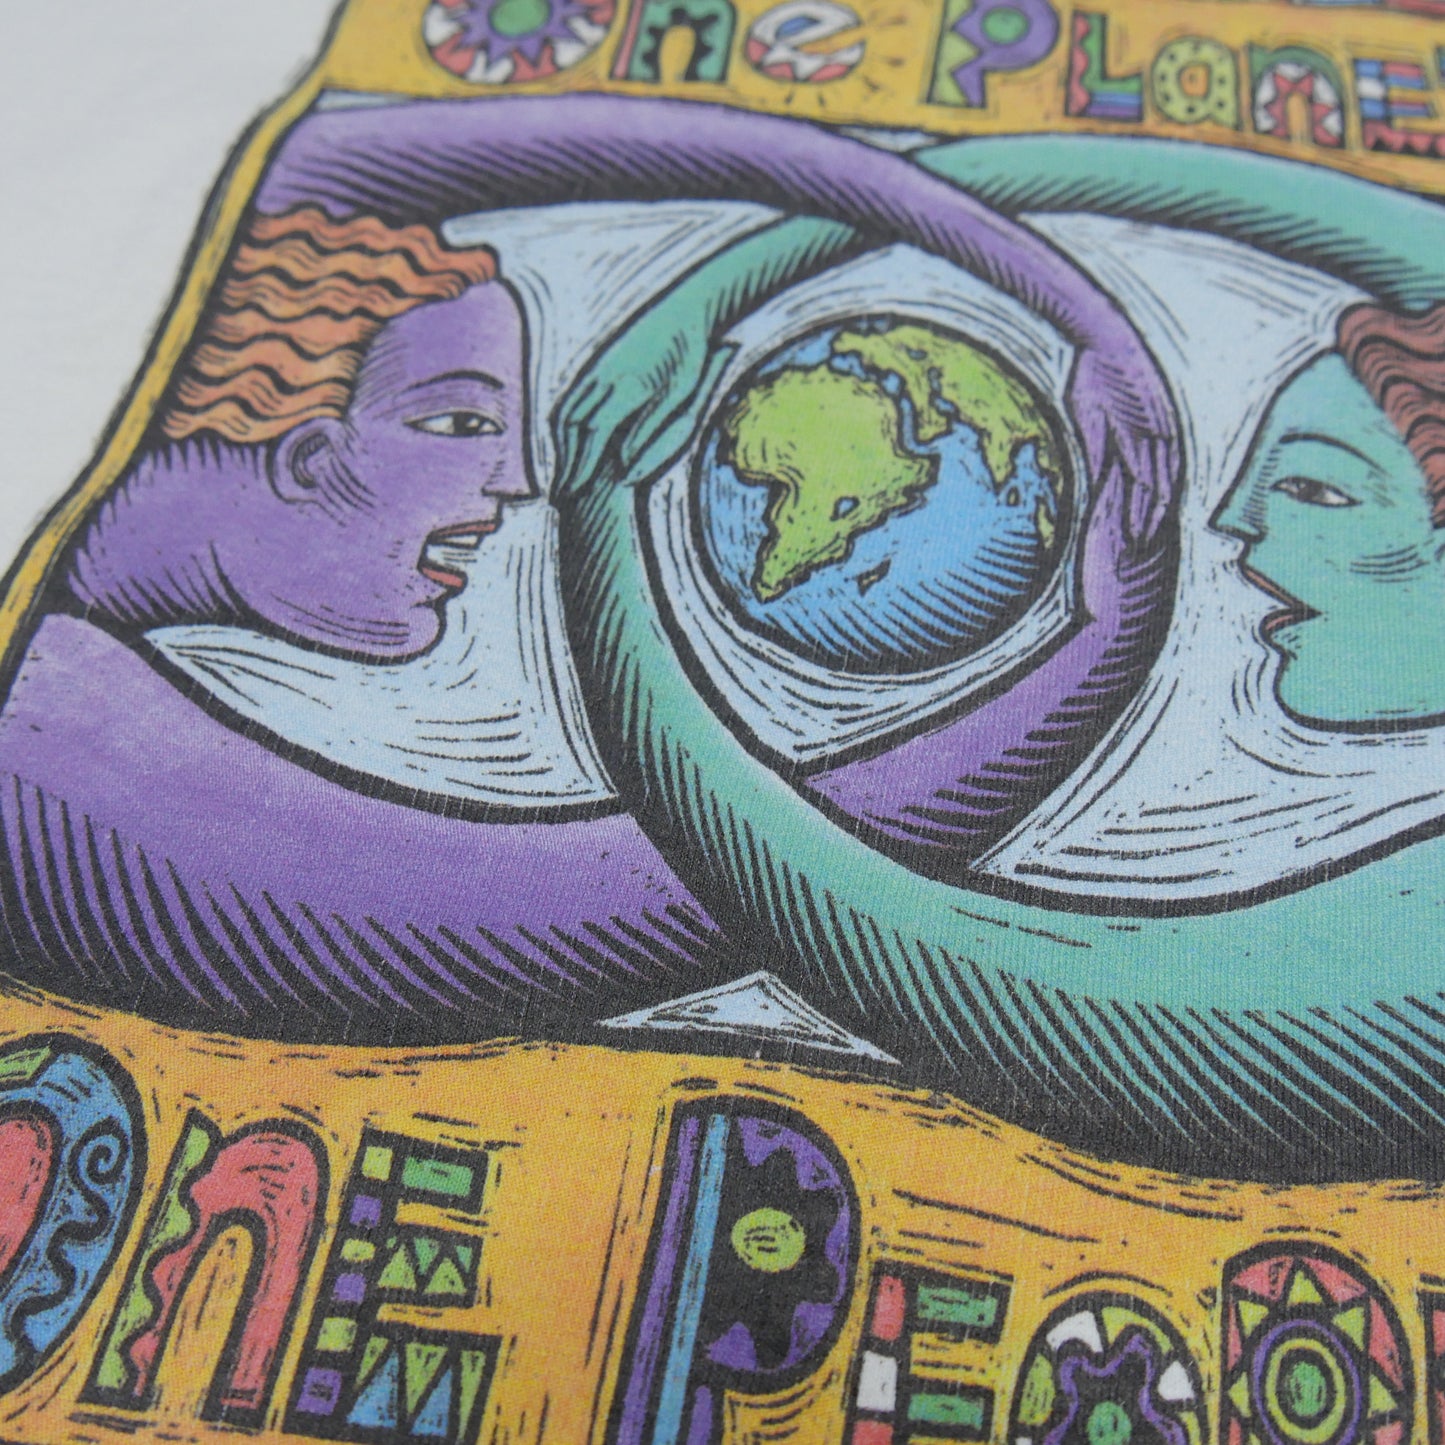 One Planet One People Shirt - XXL